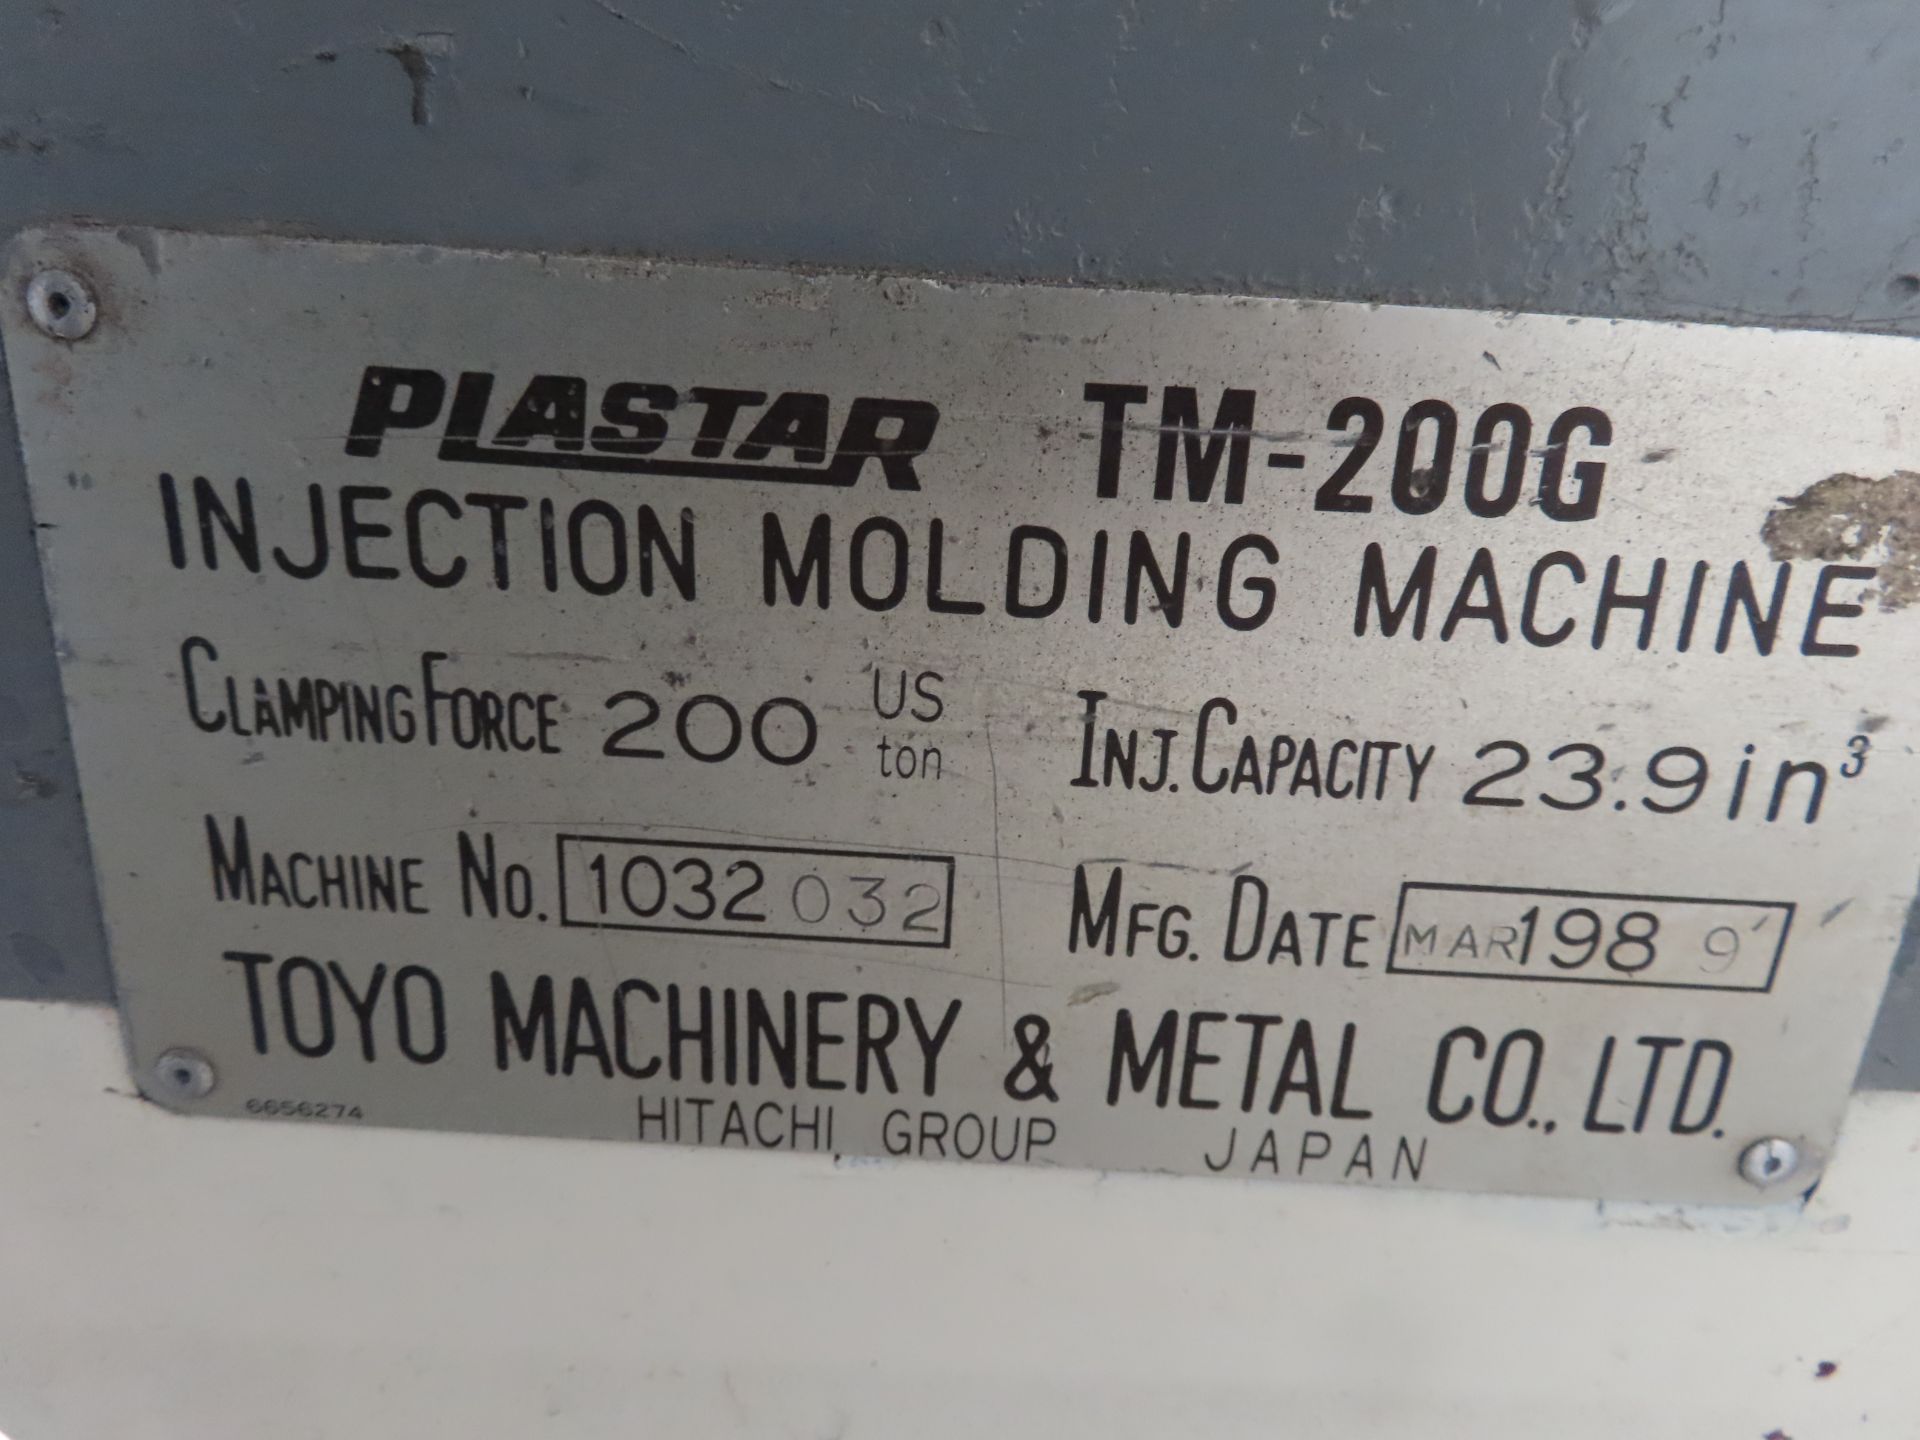 (1989) Toyo Plastar mod. TM-200G, 200 Ton x23.9 in³ Injection Molding Capacity Plastic Injection - Image 10 of 10